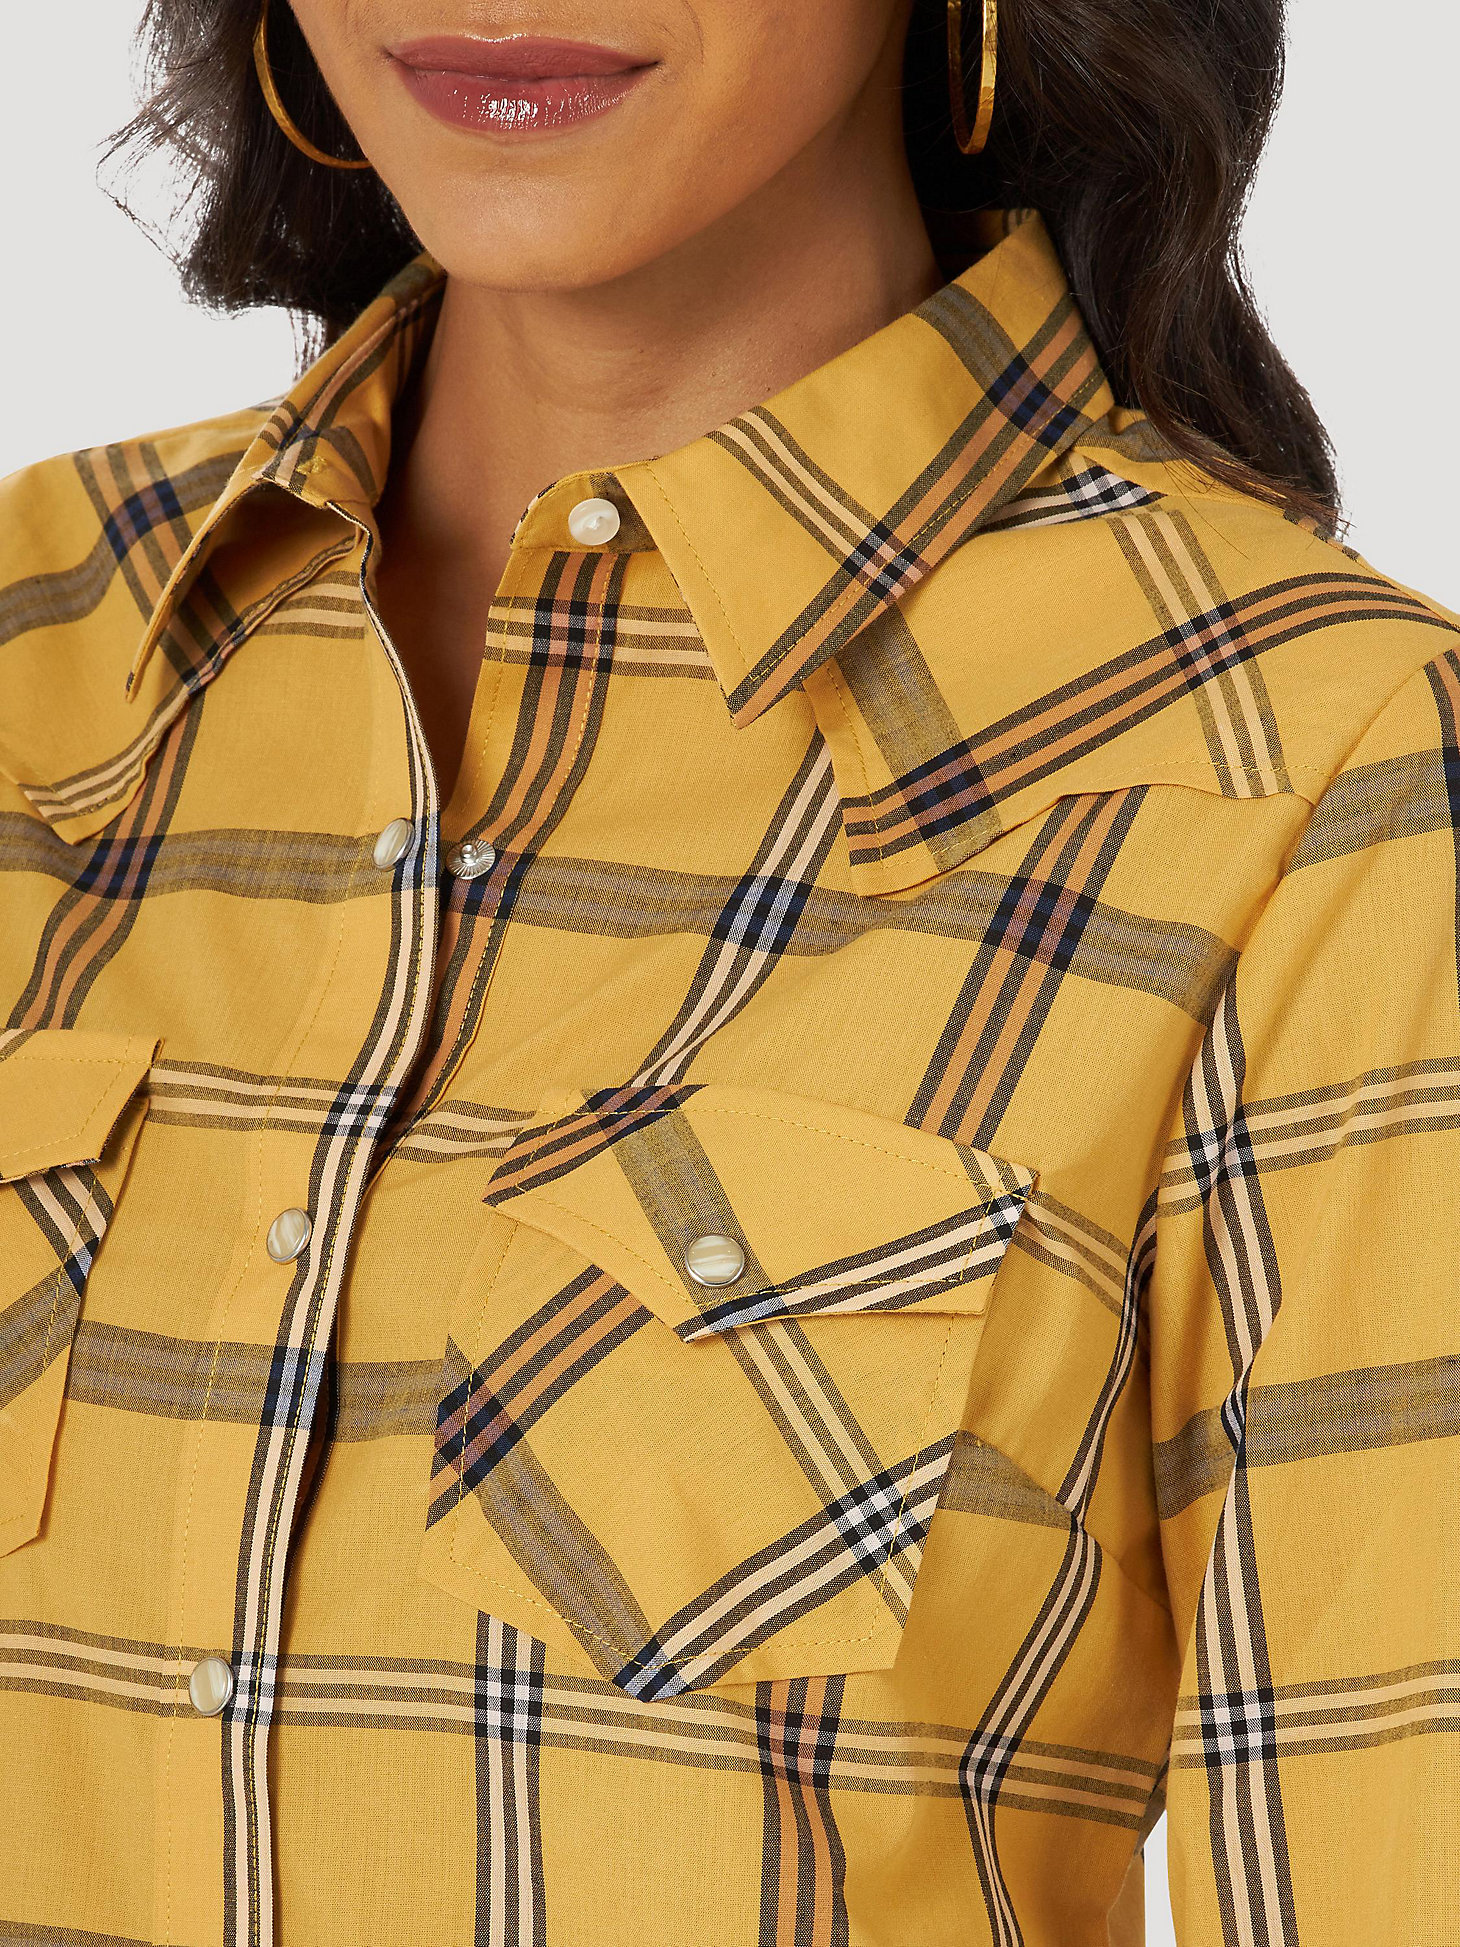 Women's Essential Long Sleeve Plaid Western Snap Top in Yellow alternative view 2